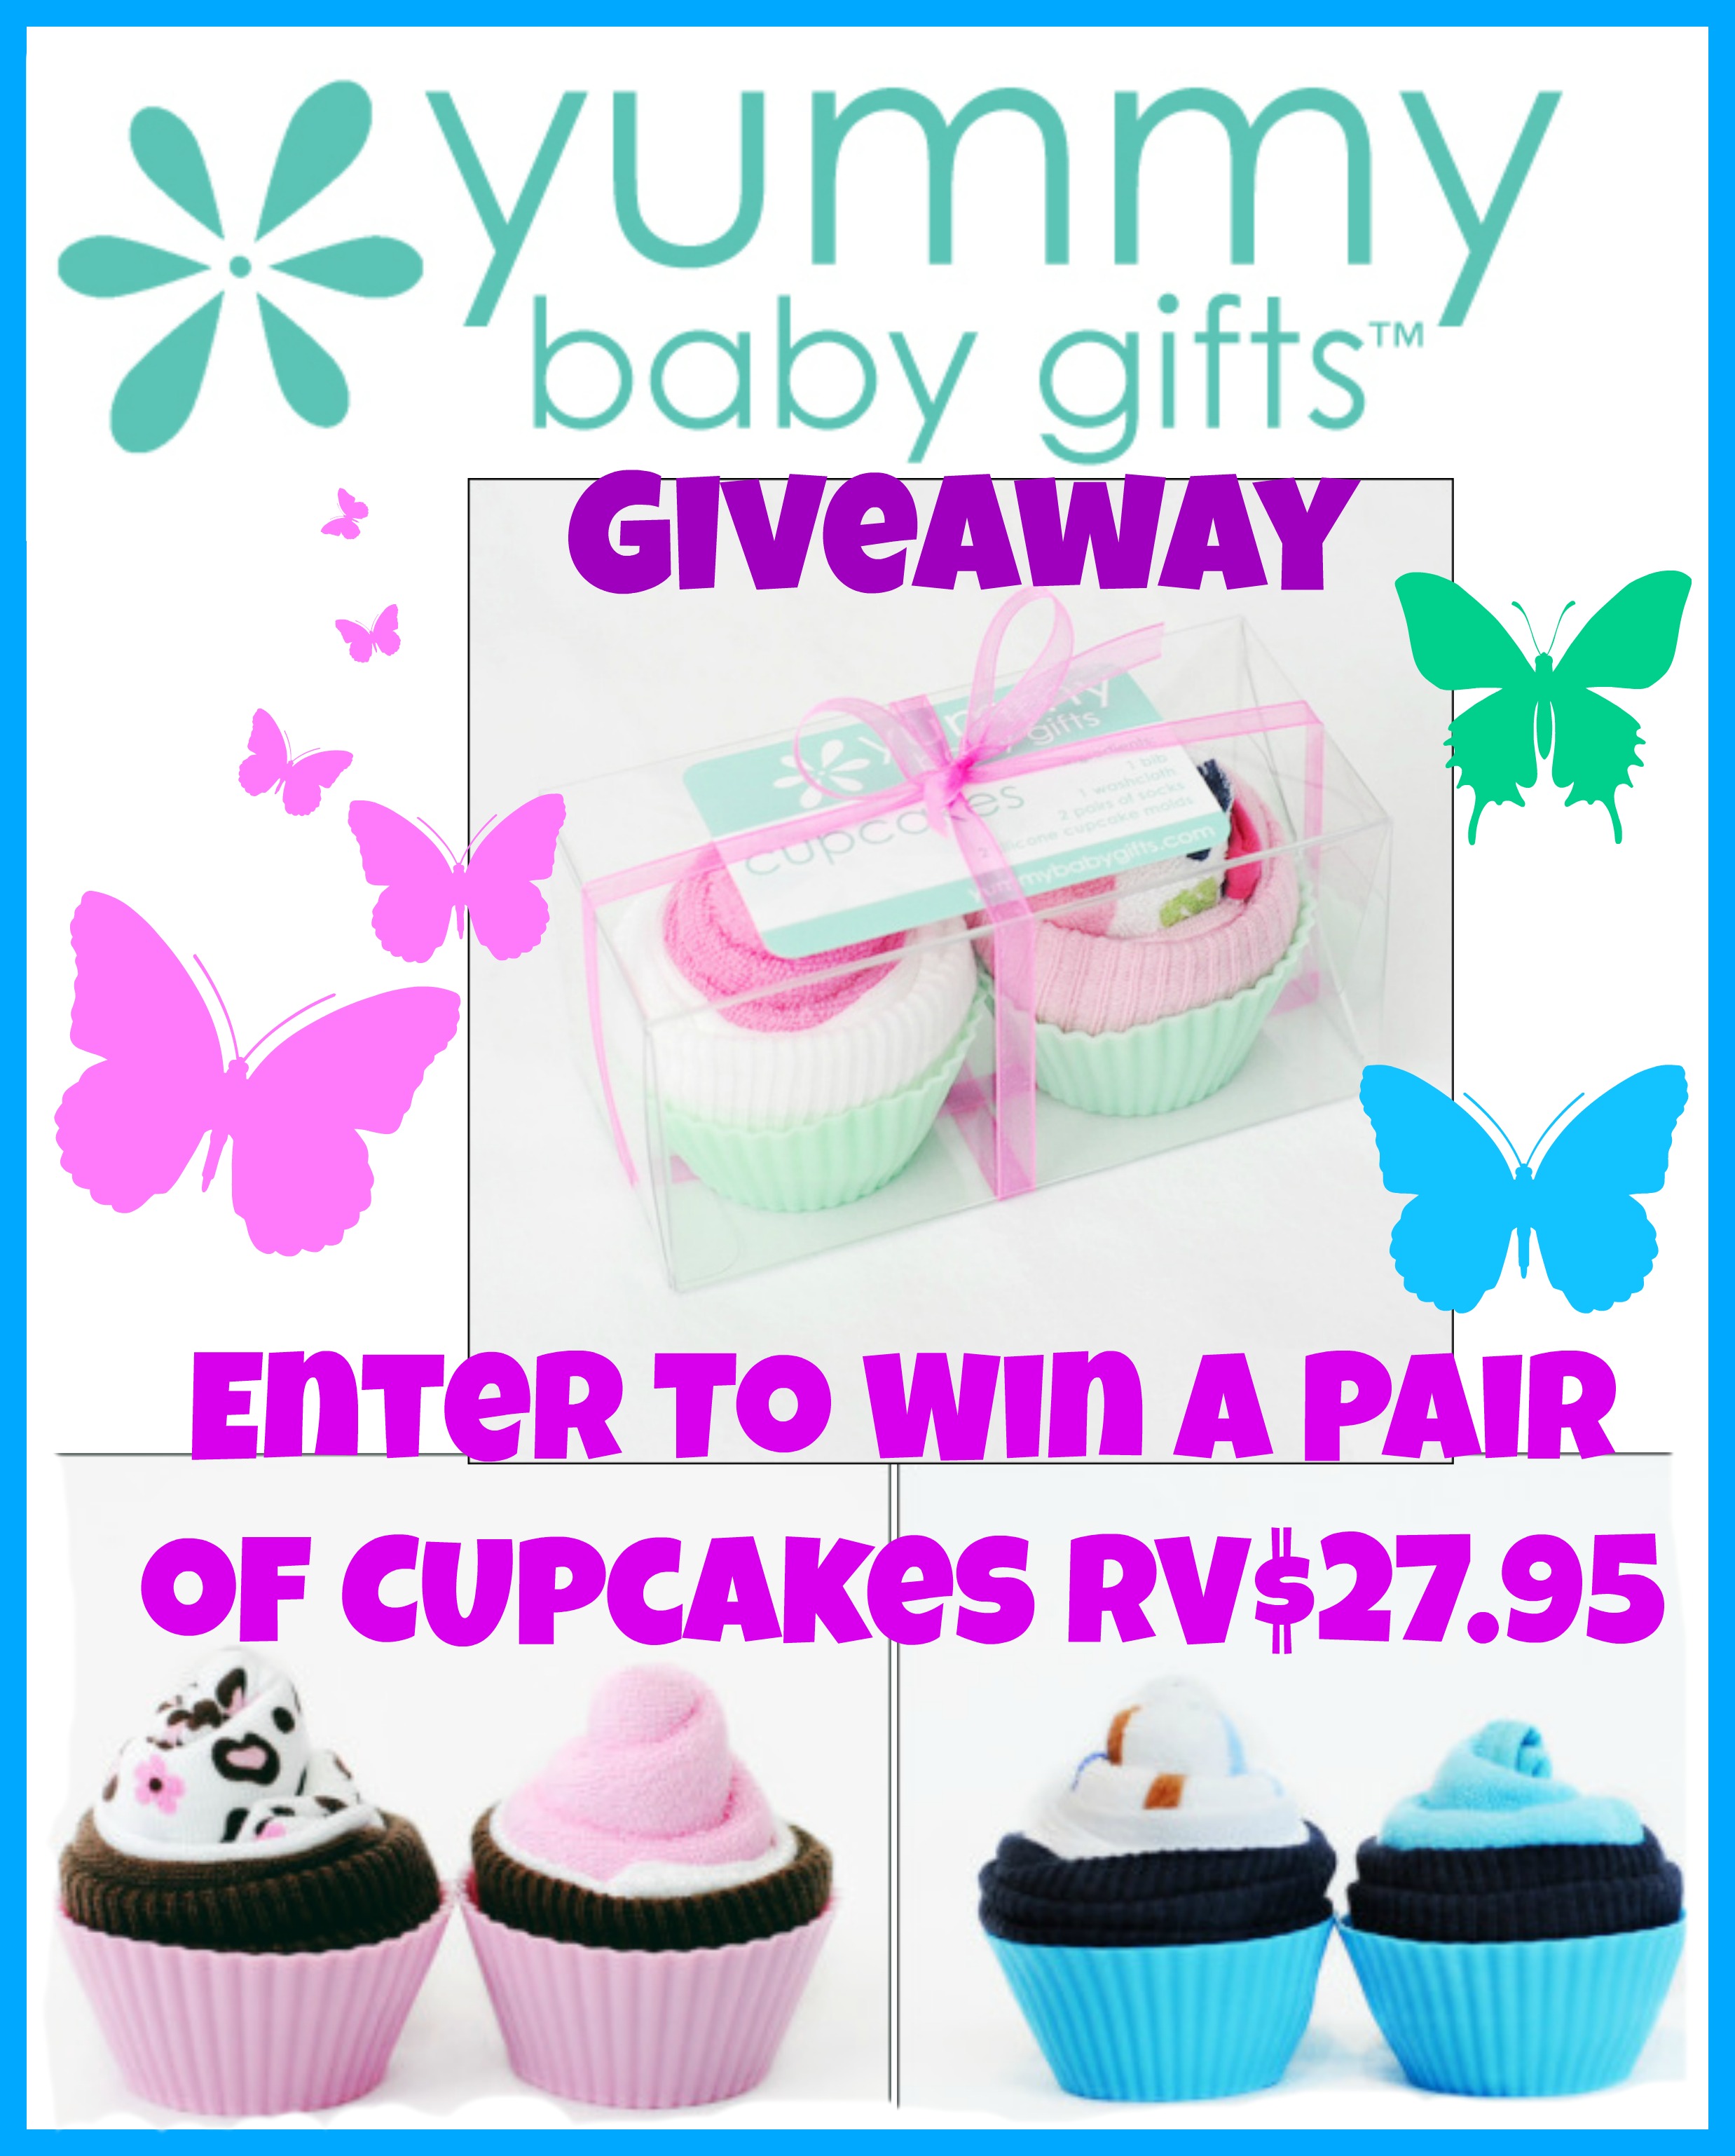 Yummy Baby Gifts Giveaway